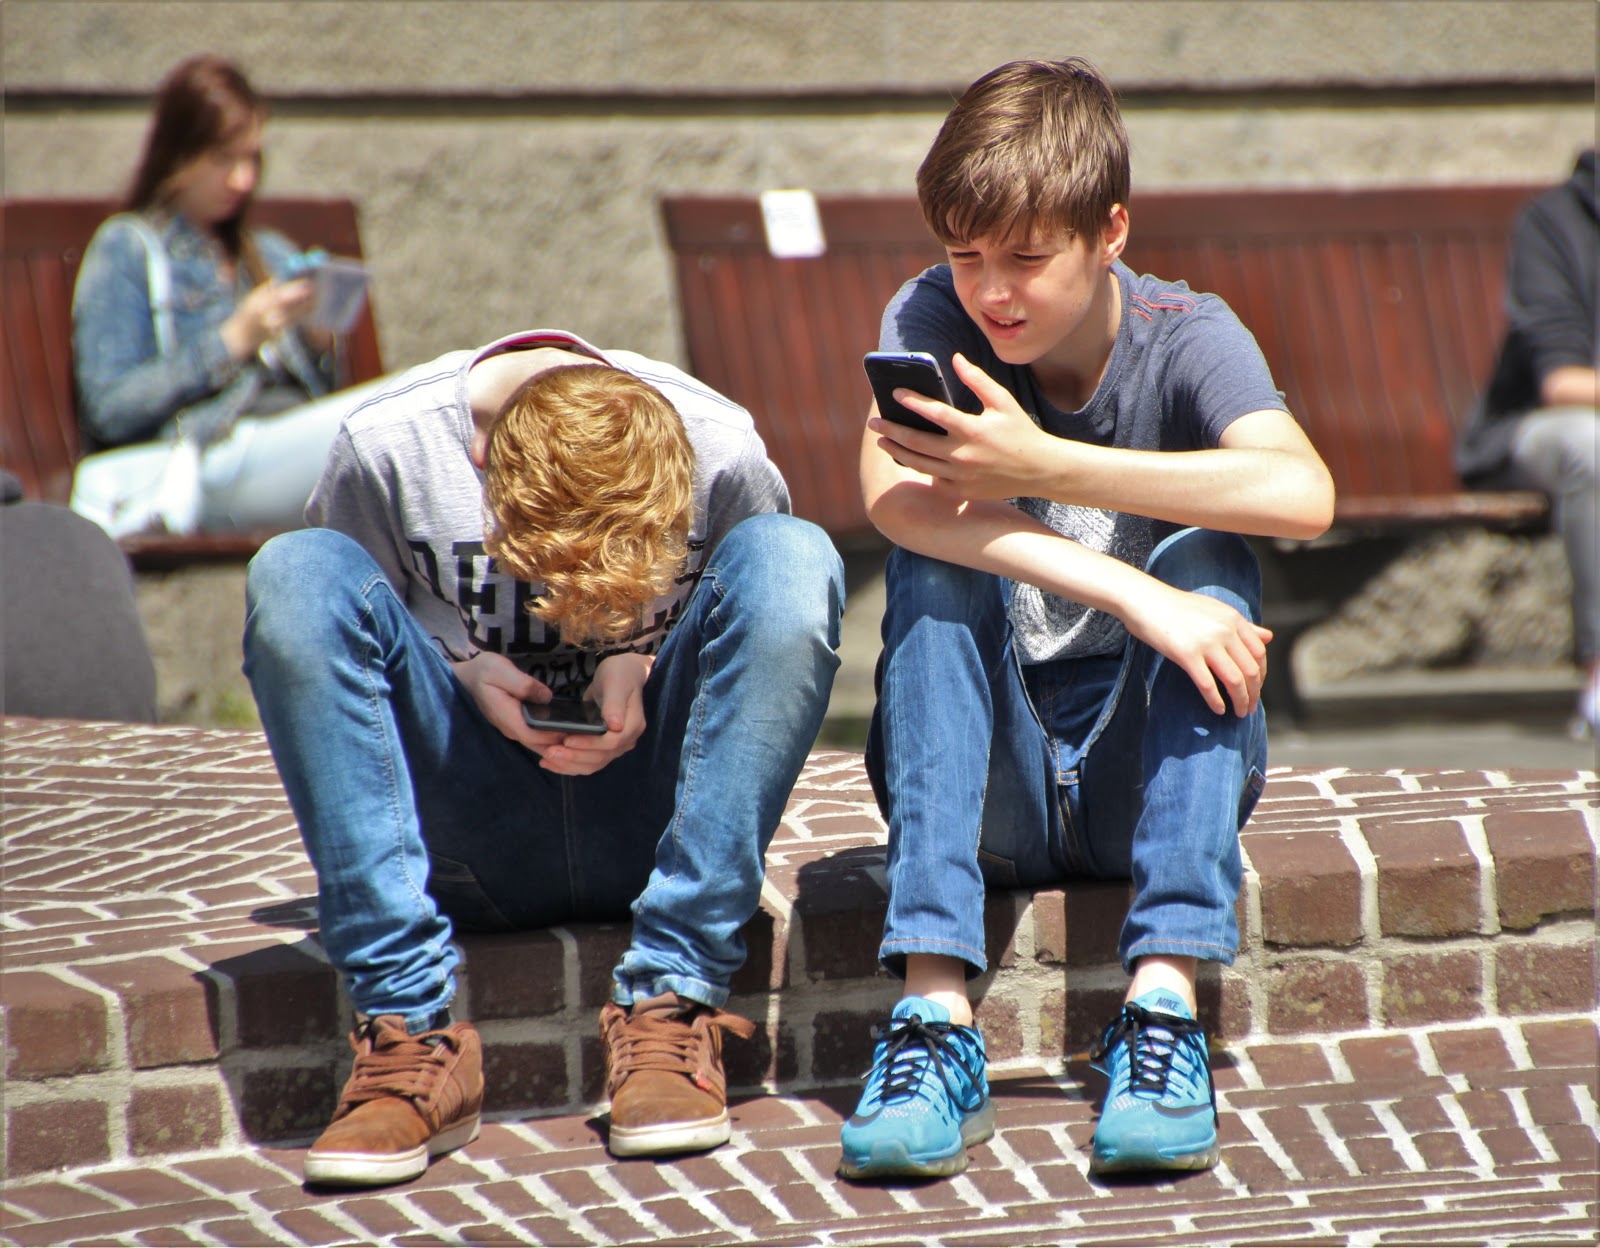 A bunch of kids browsing their mobile phones